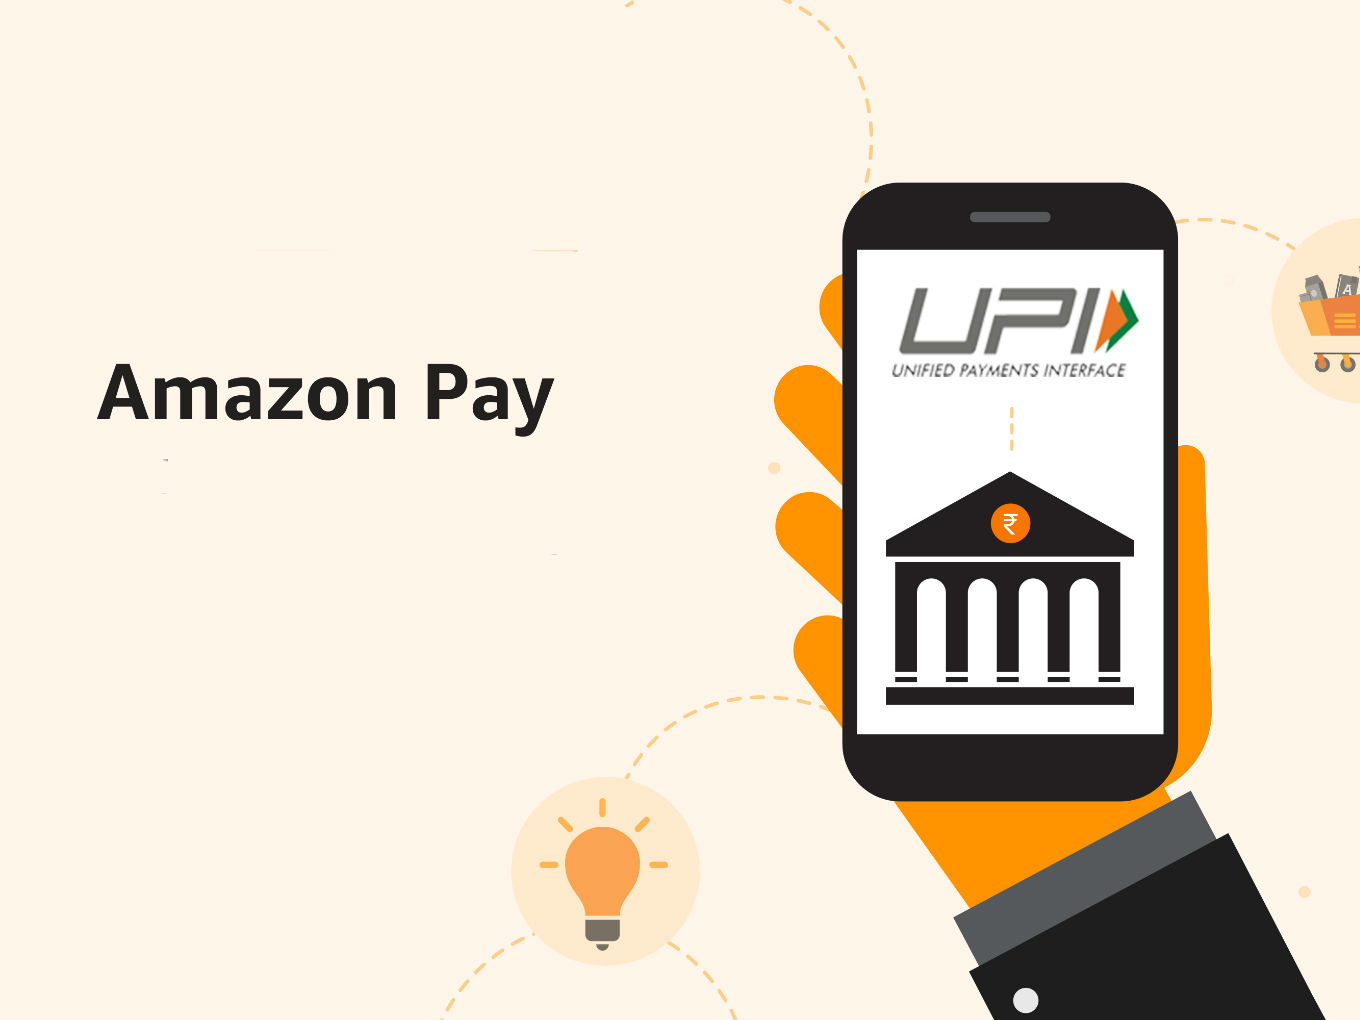 Amazon Pay Marks Its Foray In P2P Payments Via Its UPI Handle